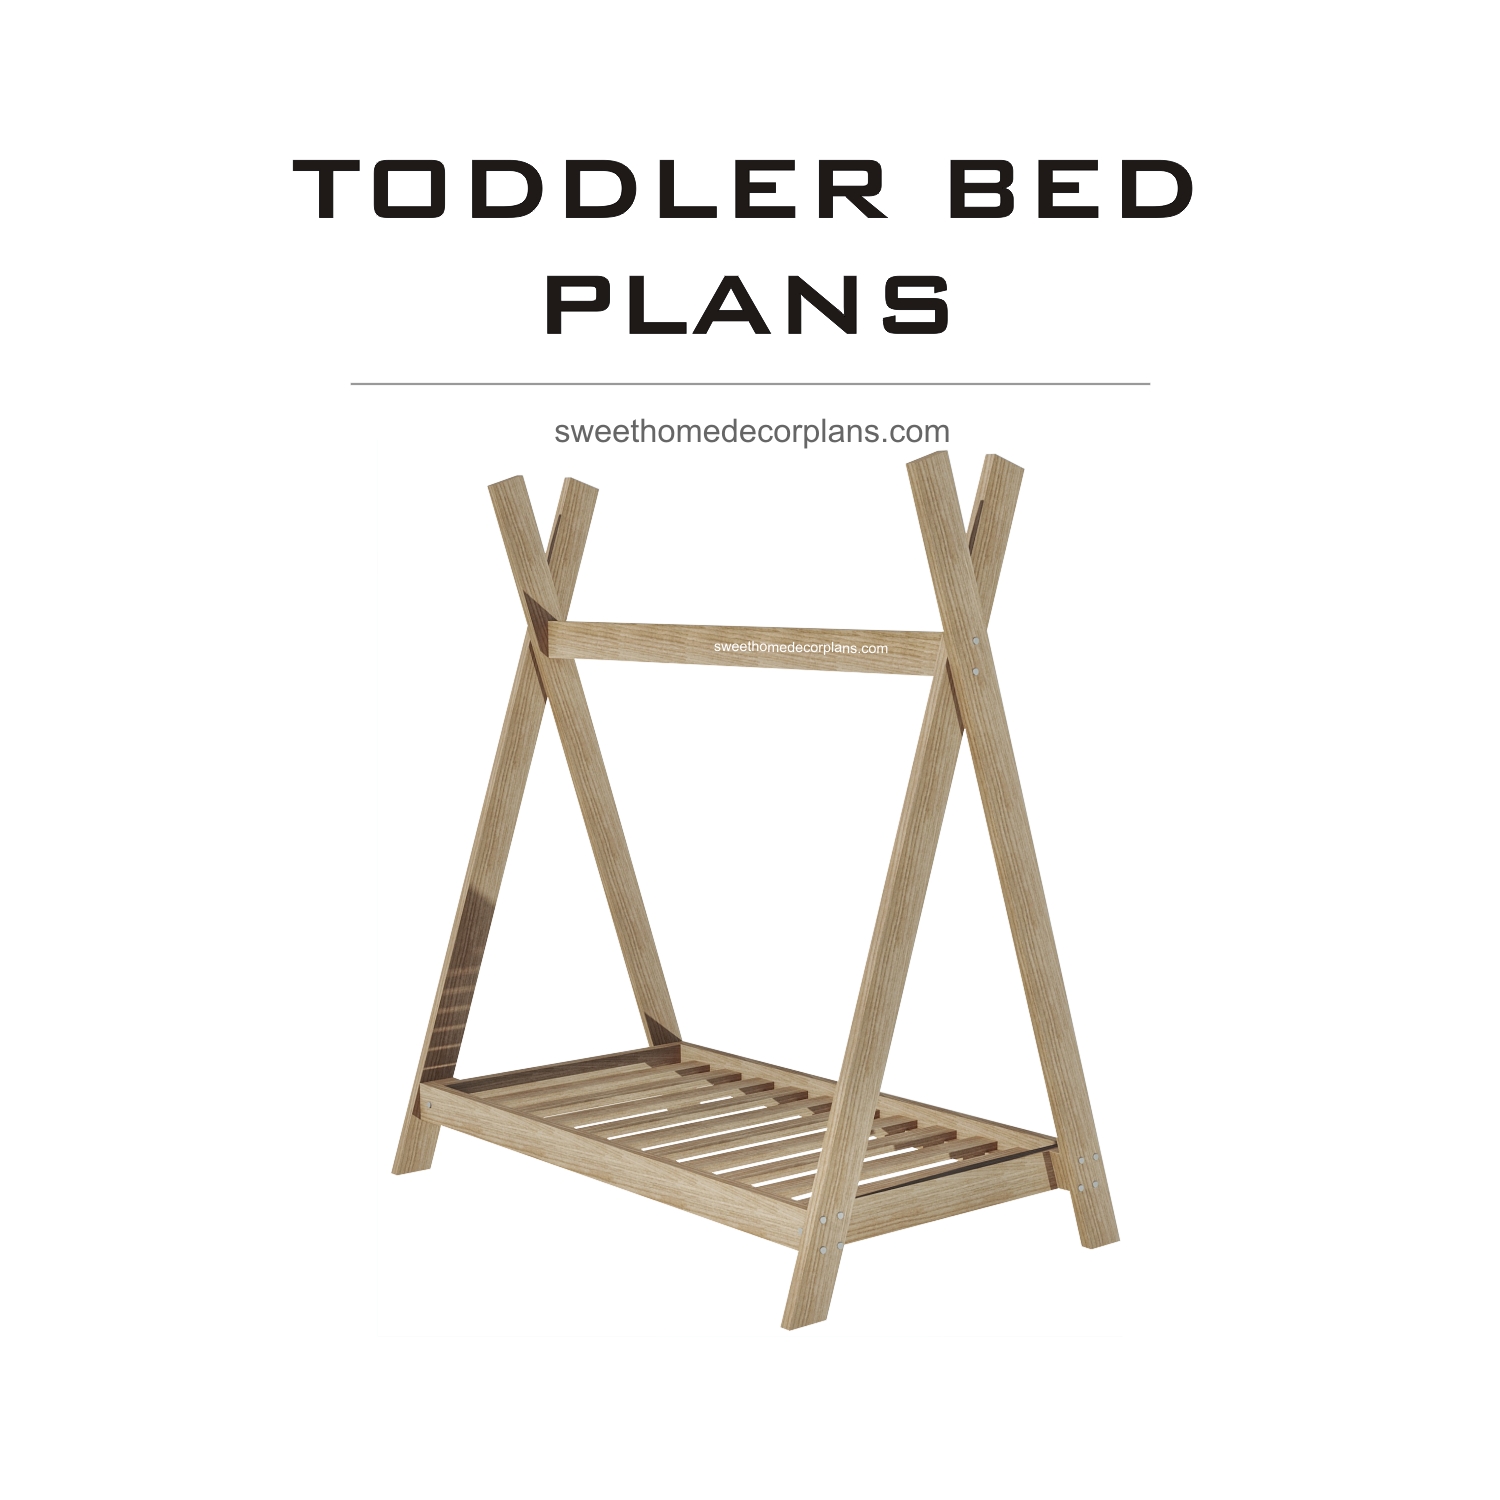 diy-wooden-teepee-toddler-bed-plans-in-pdf